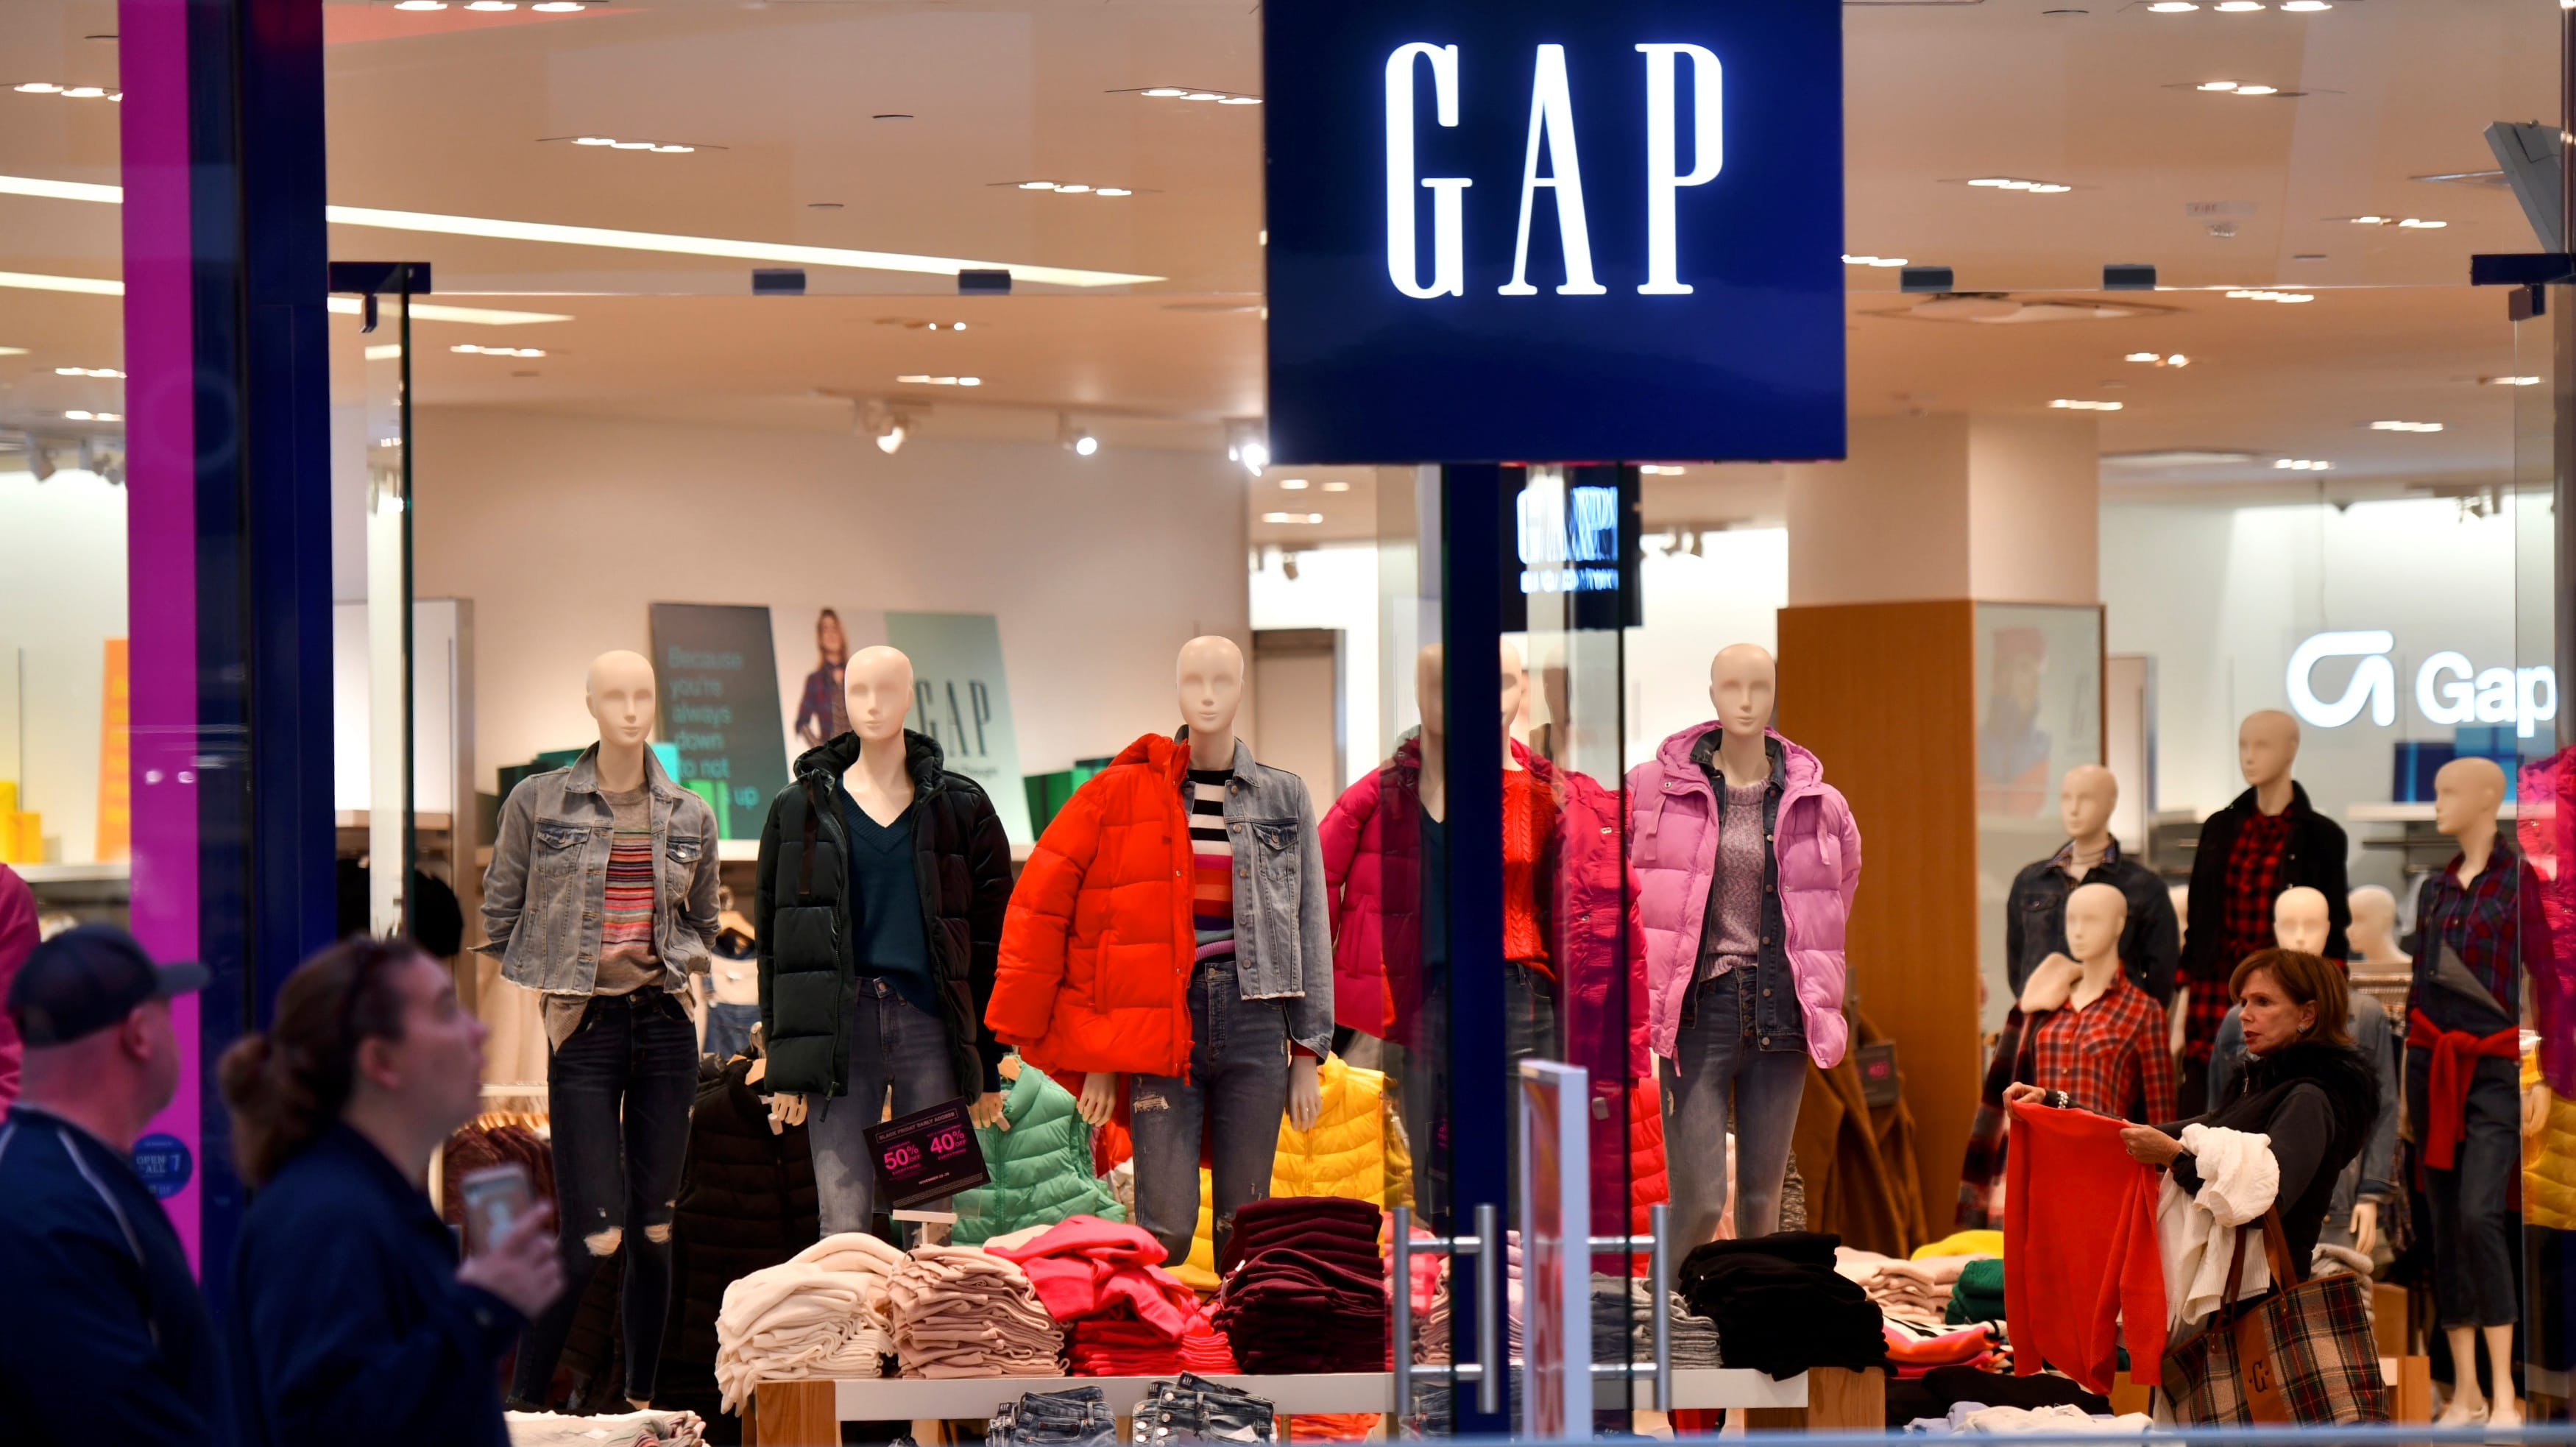 GAP: End of season clearance extra 60% off clearance styles